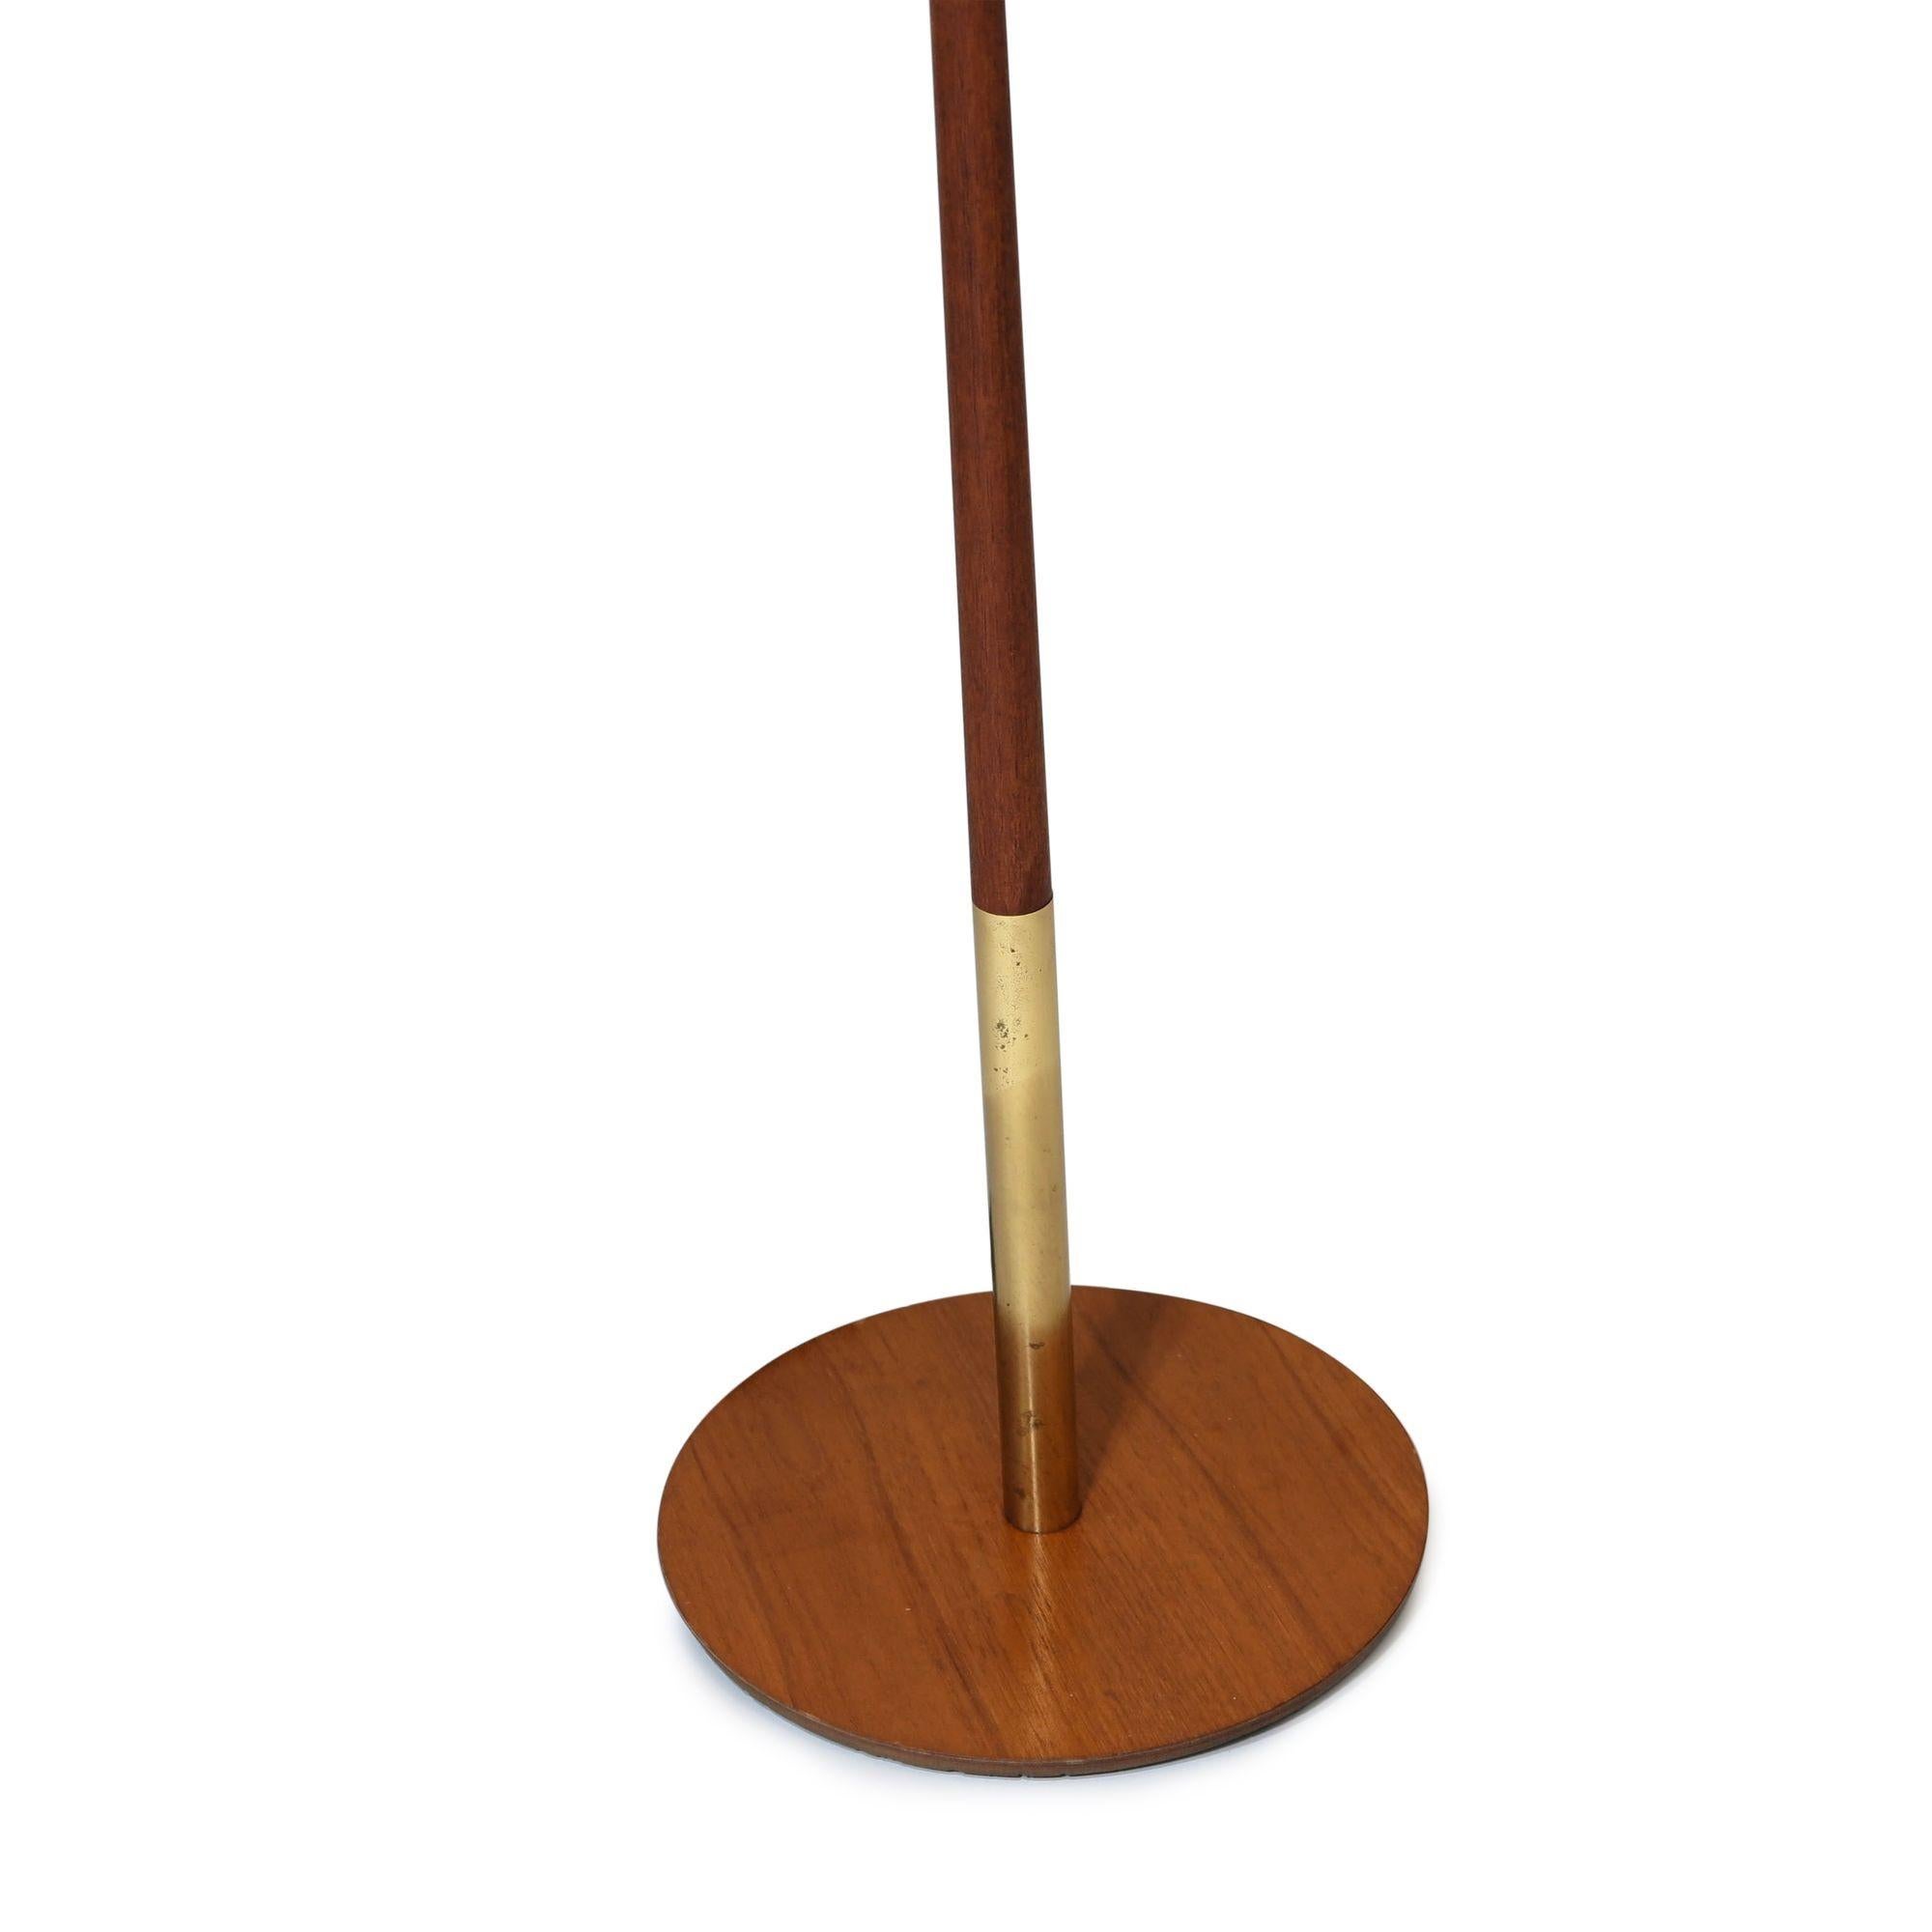 Danish floor lamp of teak and brass with cow hide shade, new wiring with silk cord. 
Lamp H 69.25'' x D 12.5''
Lamp Shade H 12'' x D 24''.